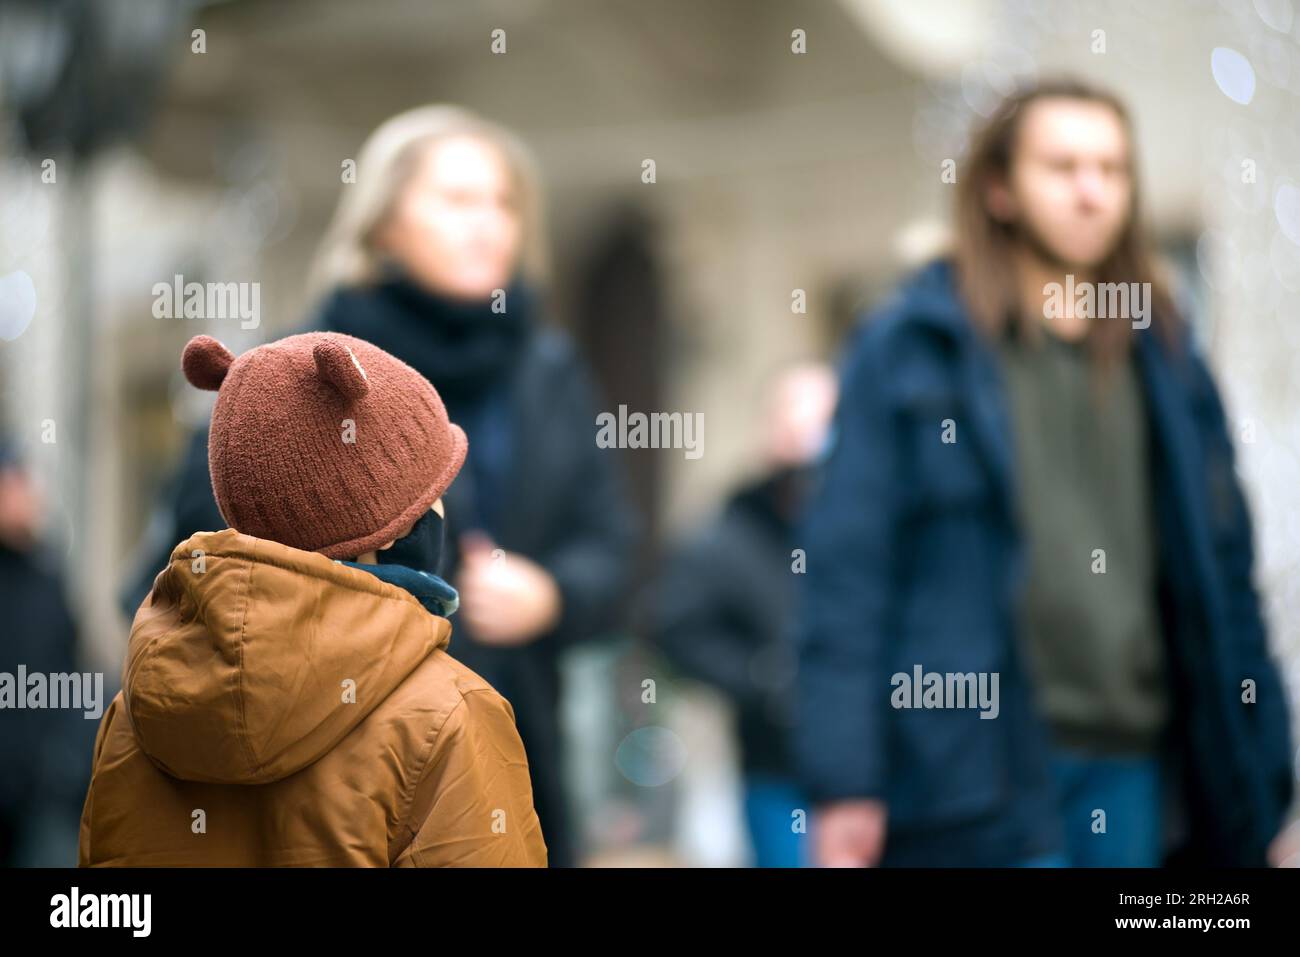 Child on the street watching defocused people passing by Stock Photo